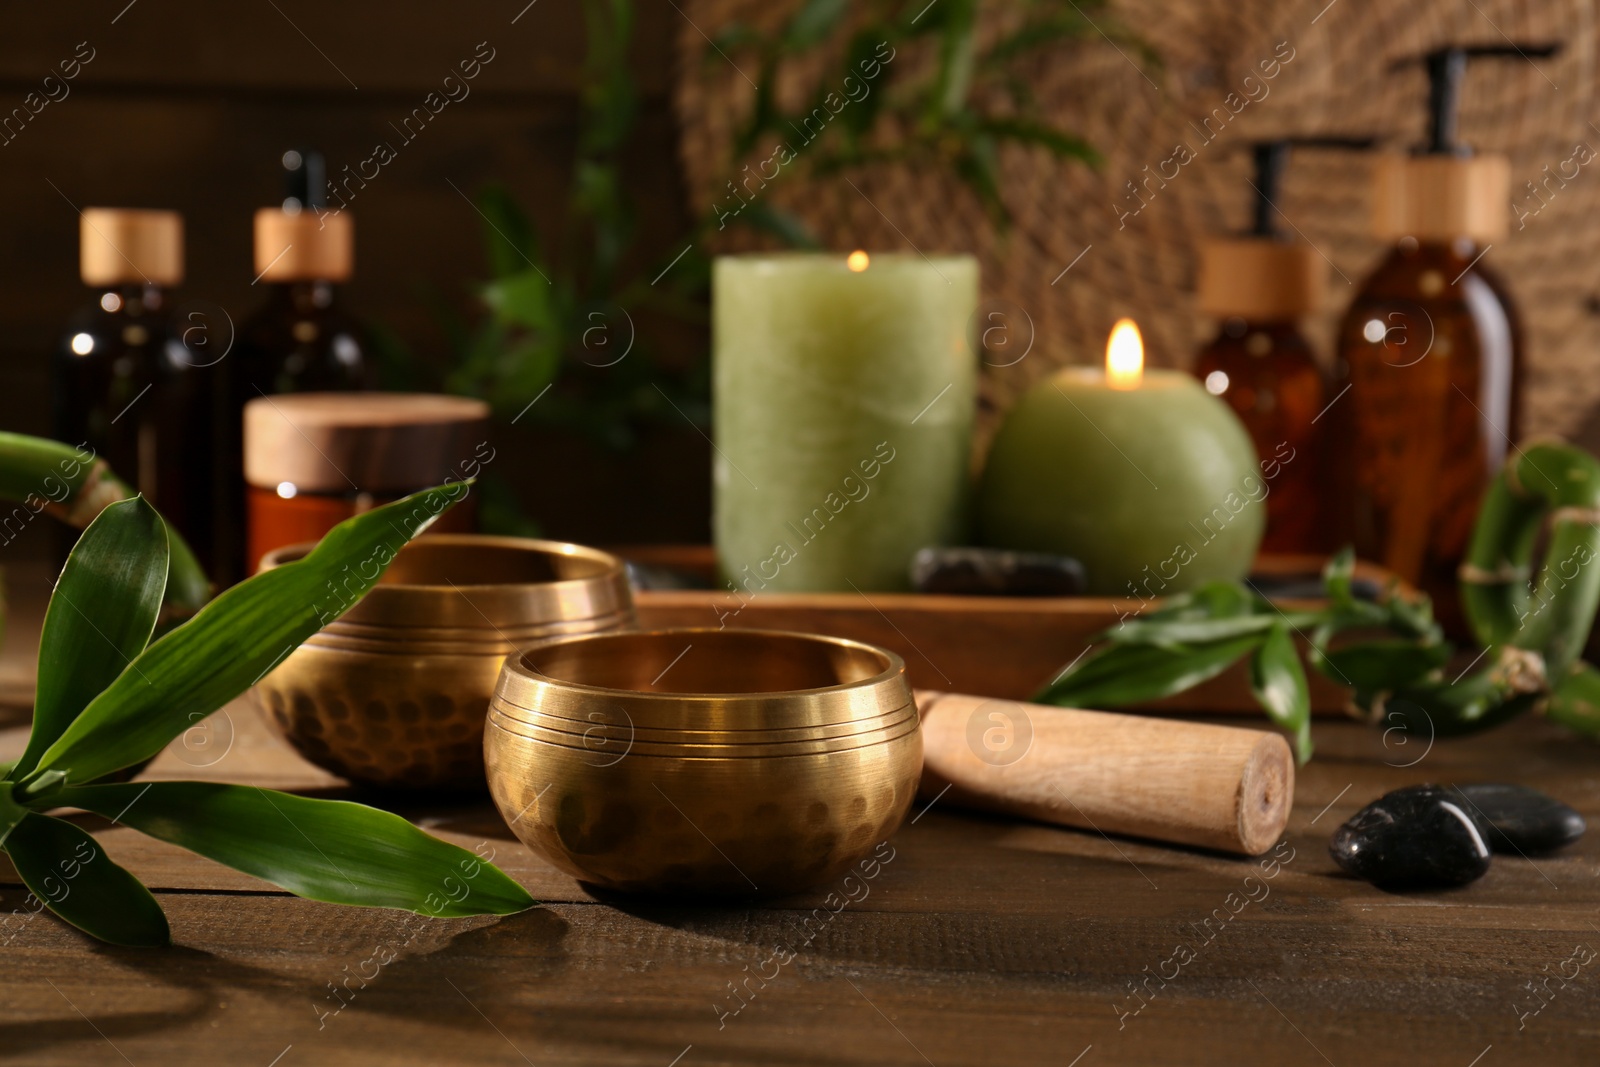 Photo of Green branches, singing bowls and burning candles on wooden table